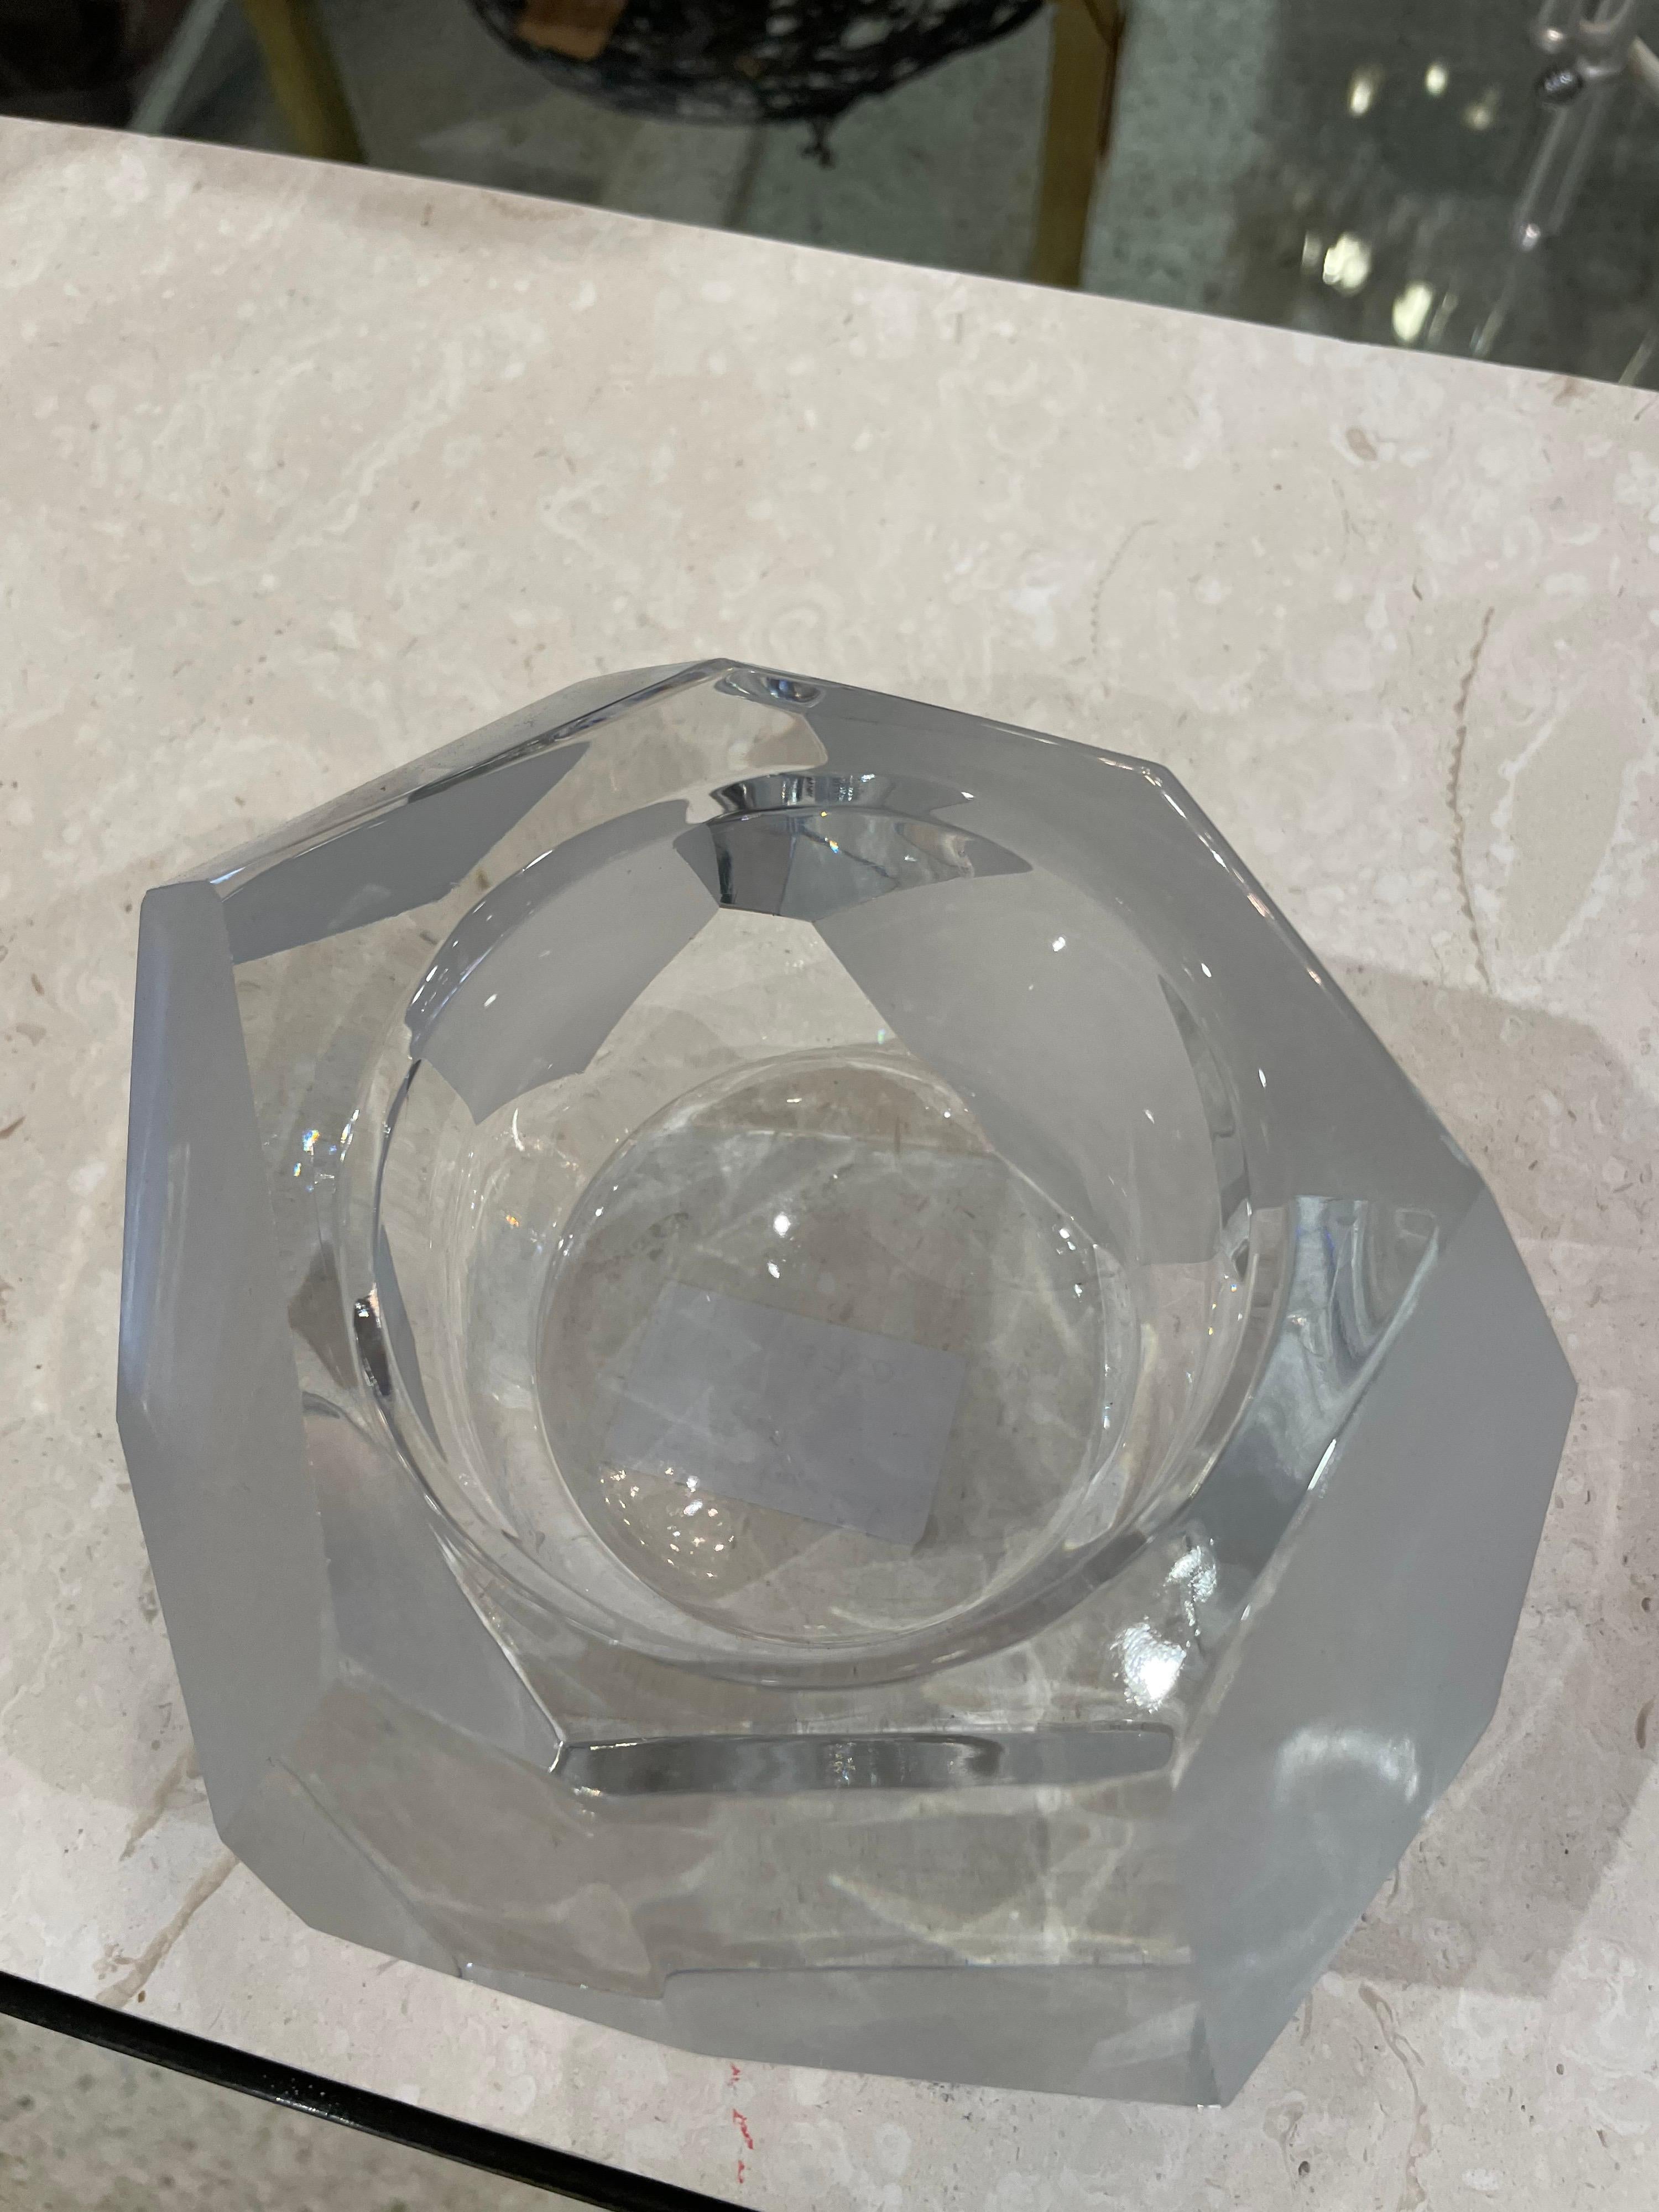 Wonderful geometric faceted small Italian bowl in clear and frosted finish to glass. Heavy and chunky thick glass.